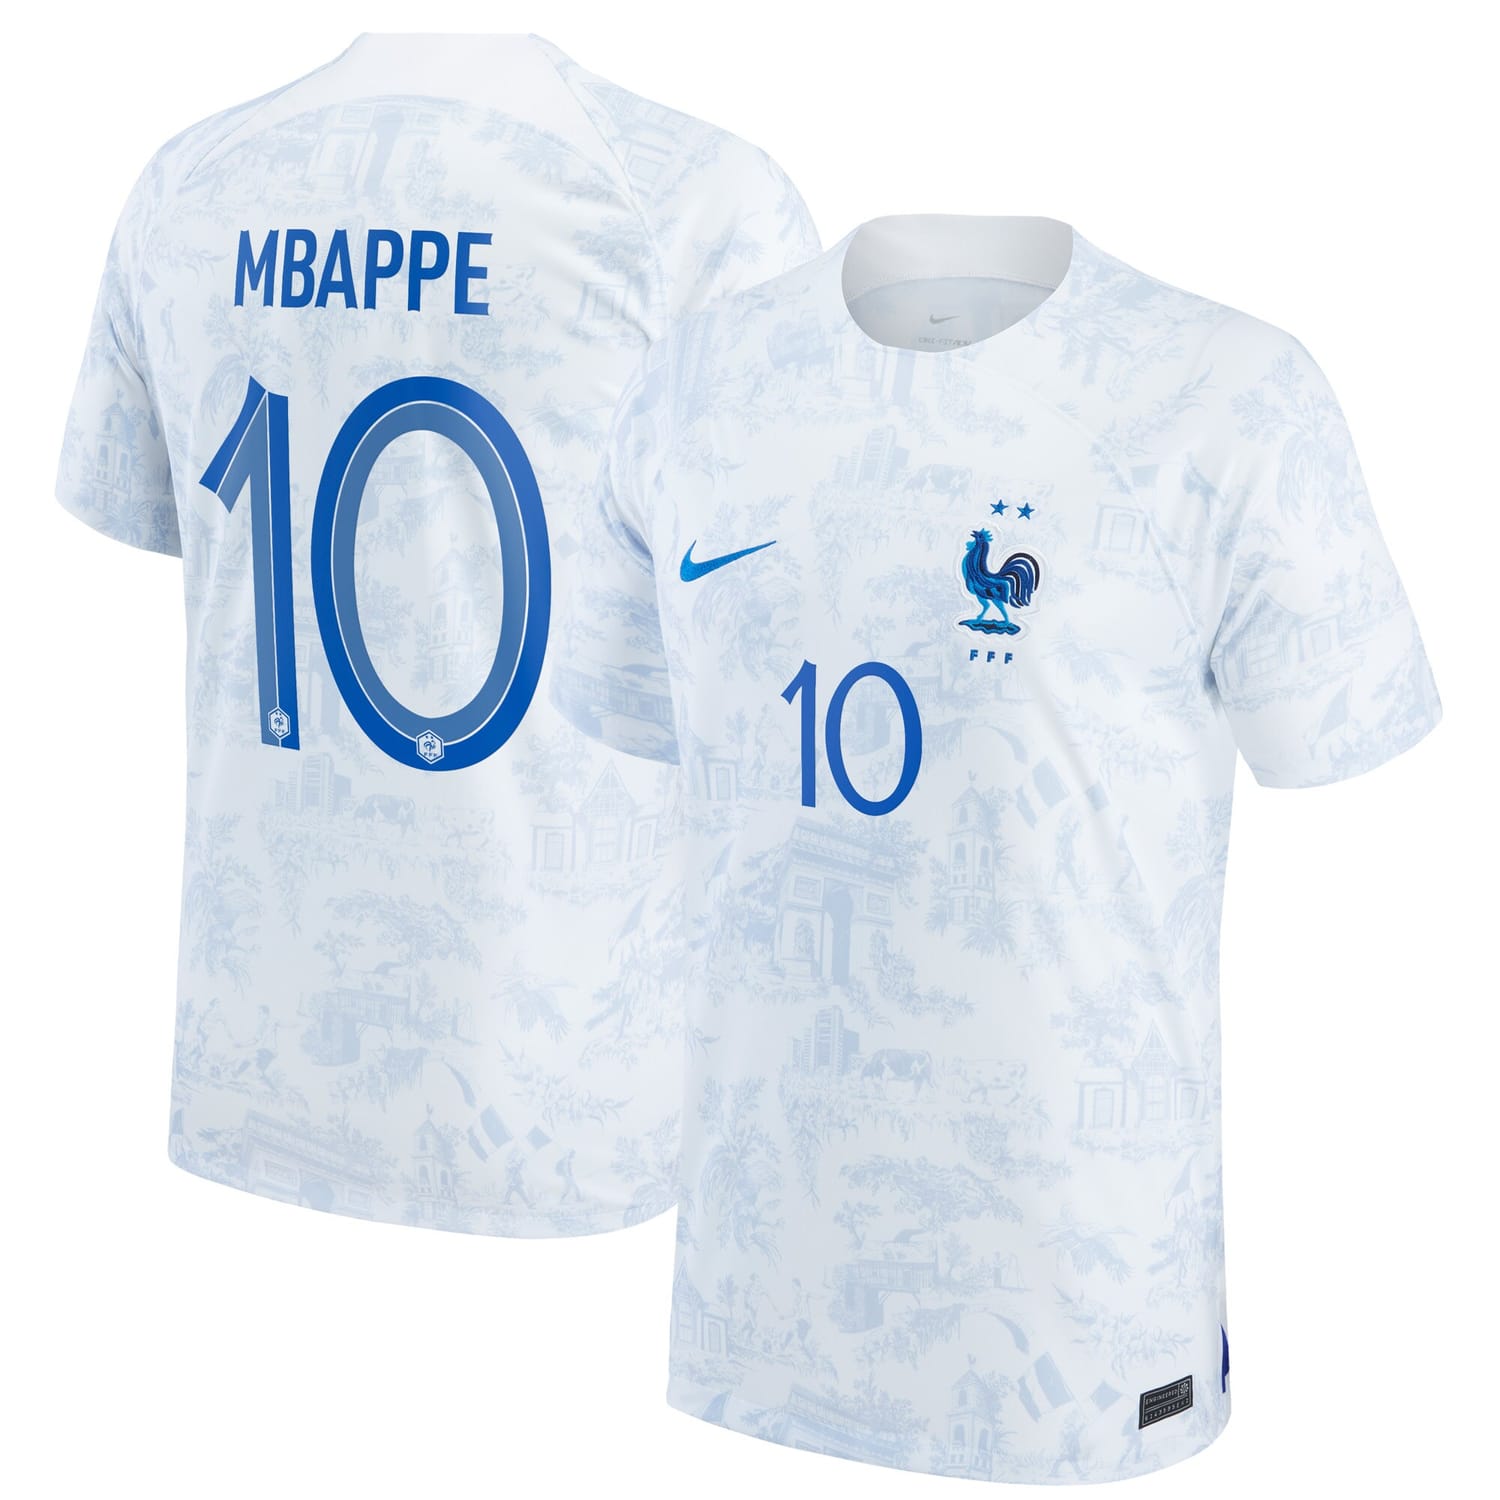 France National Team Away Jersey Shirt White 2022-23 player Kylian Mbappe printing for Men